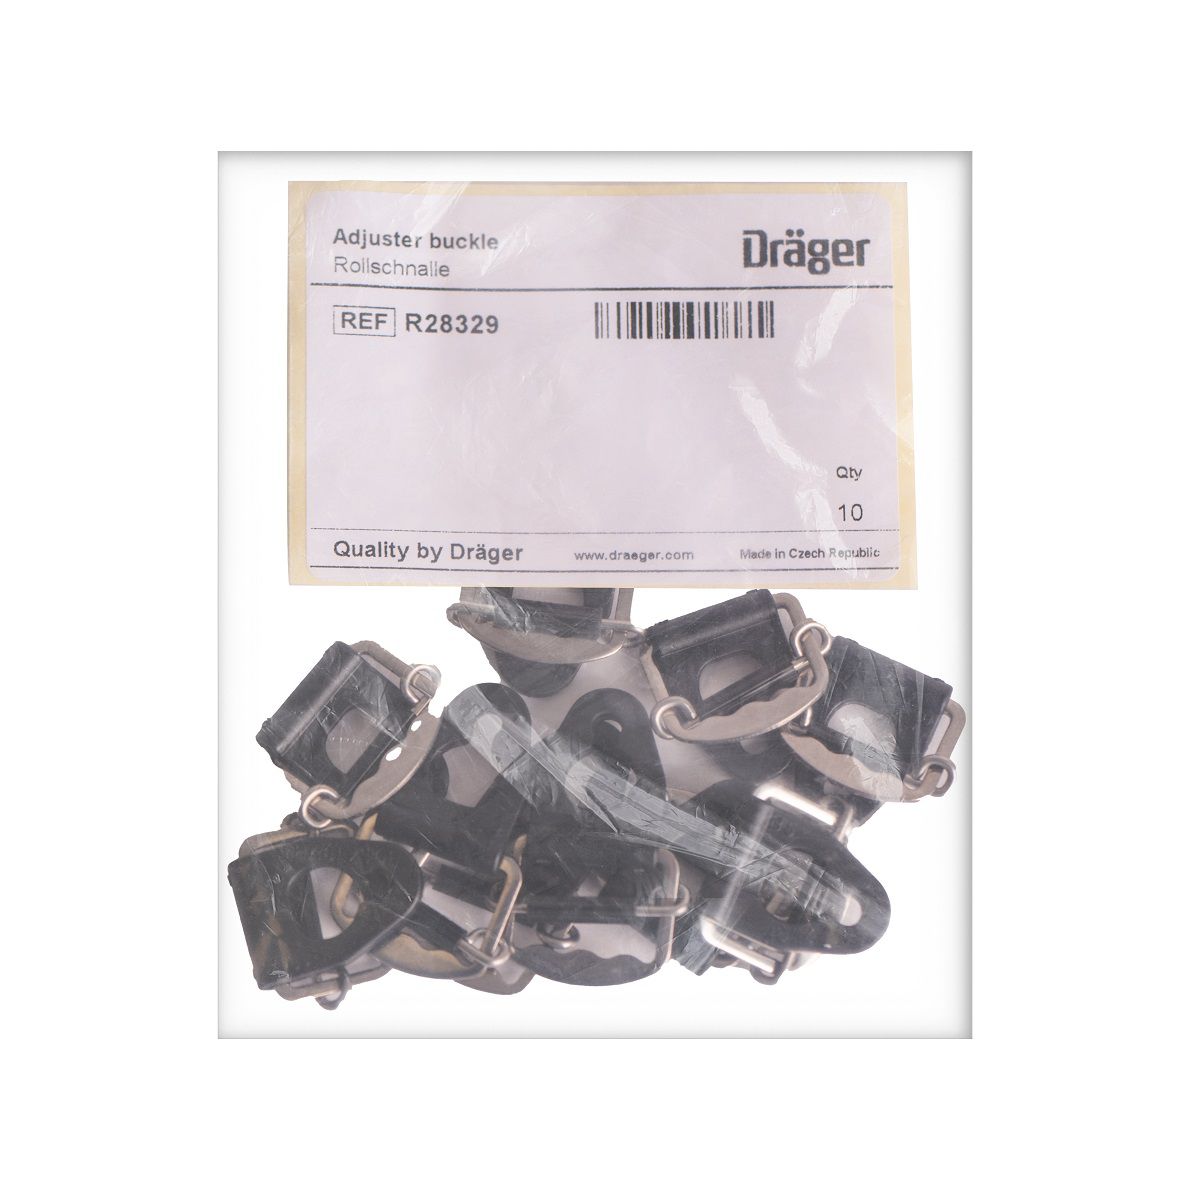 Dräger roller buckle (PU = 10 pieces) - for head gear for X-plore 4740/4790/5500/6300/6530, Panorama Nova, SPH 5600 and Workaster and CPS 7800/6800